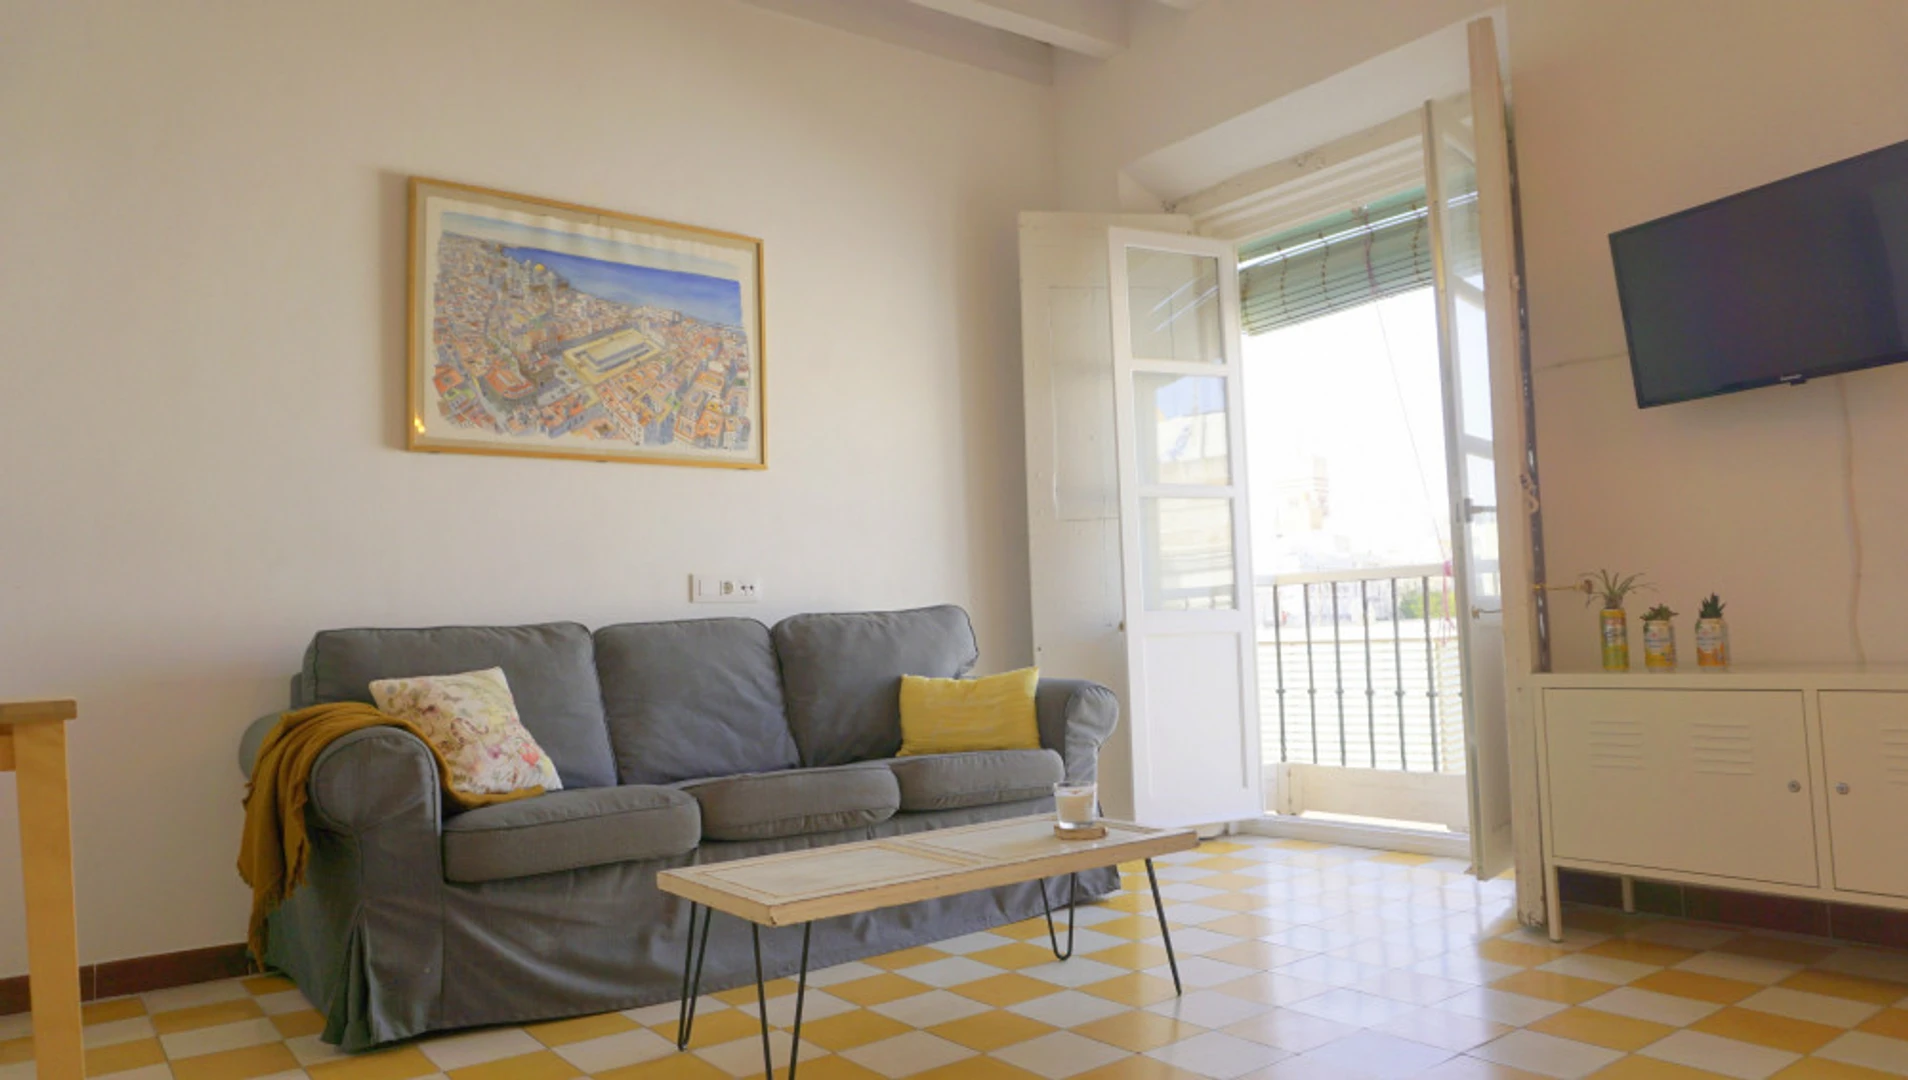 Accommodation in the centre of cadiz